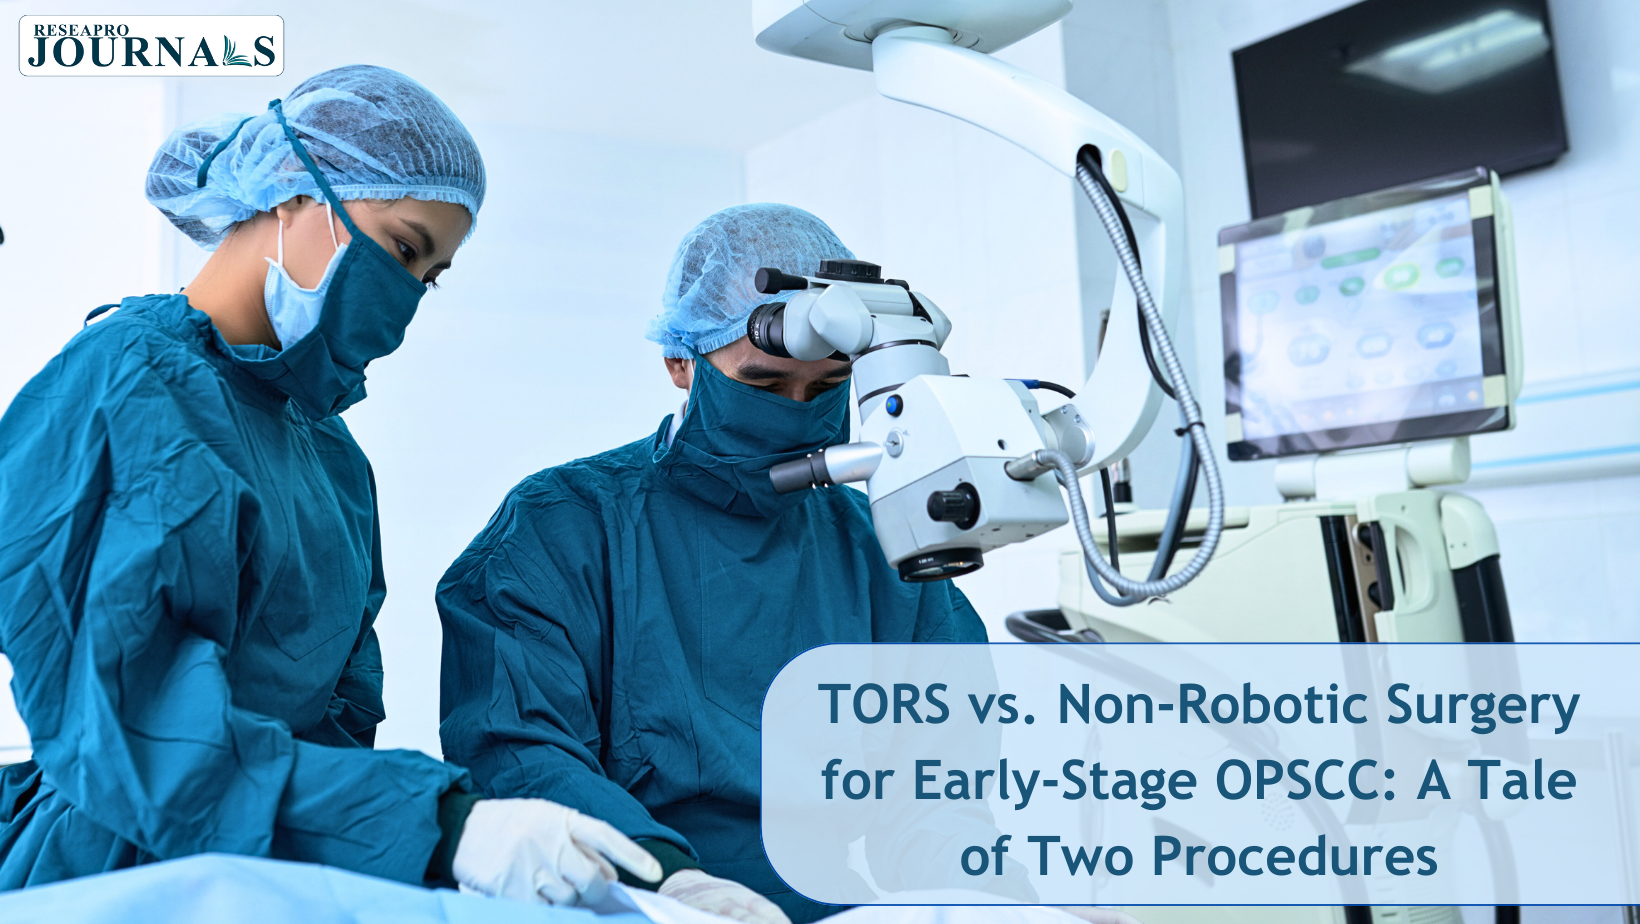 TORS vs. Non-Robotic Surgery for Early-Stage OPSCC: A Tale of Two Procedures